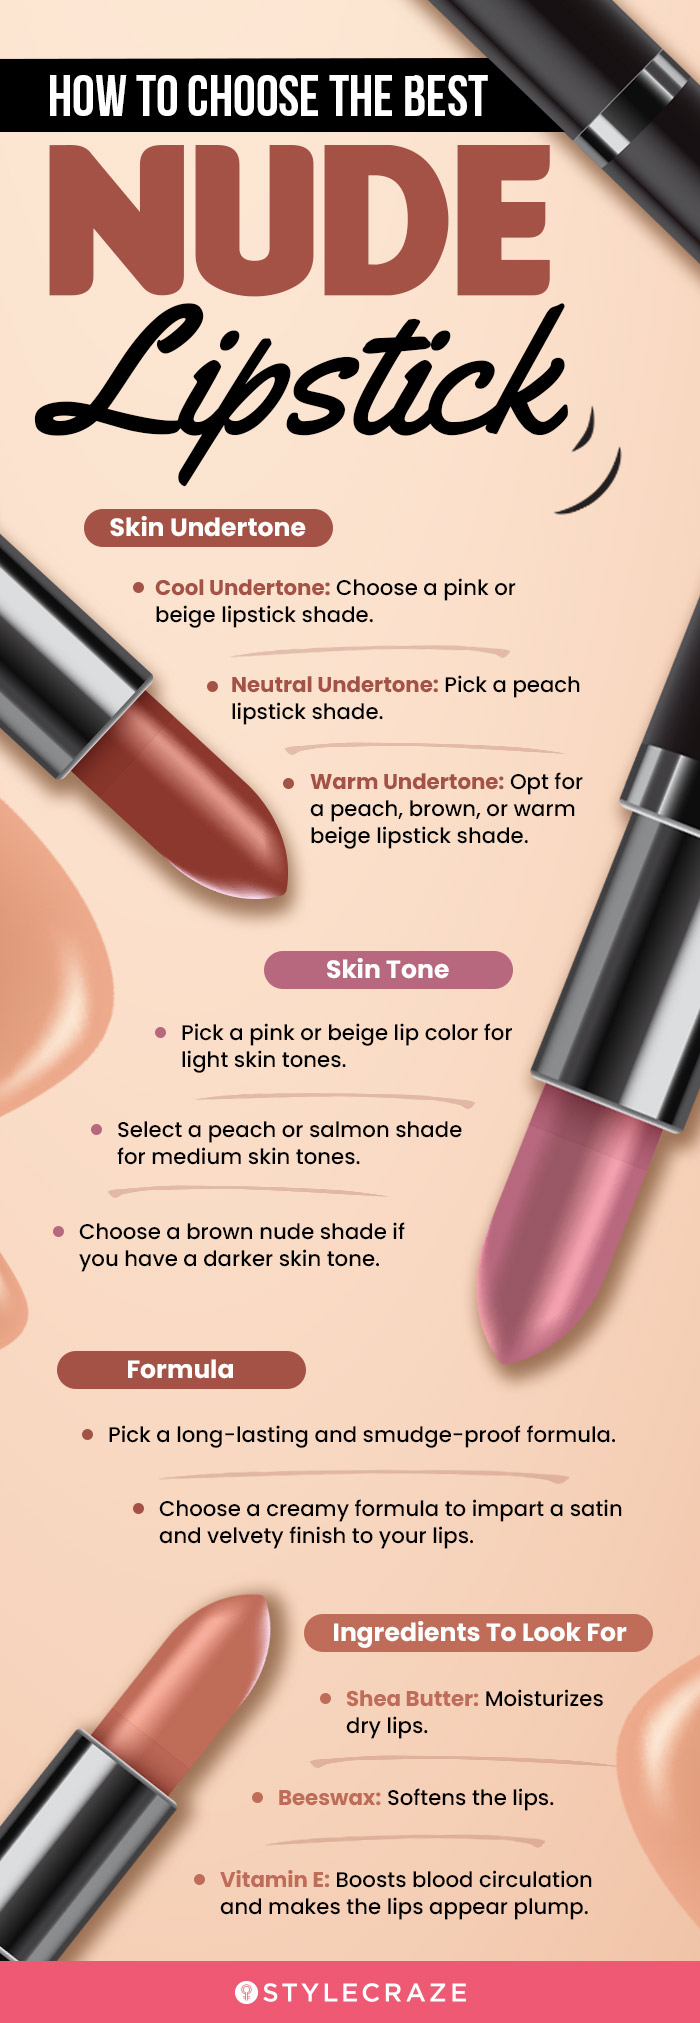 How To Choose The Best Nude Lipstick (infographic)